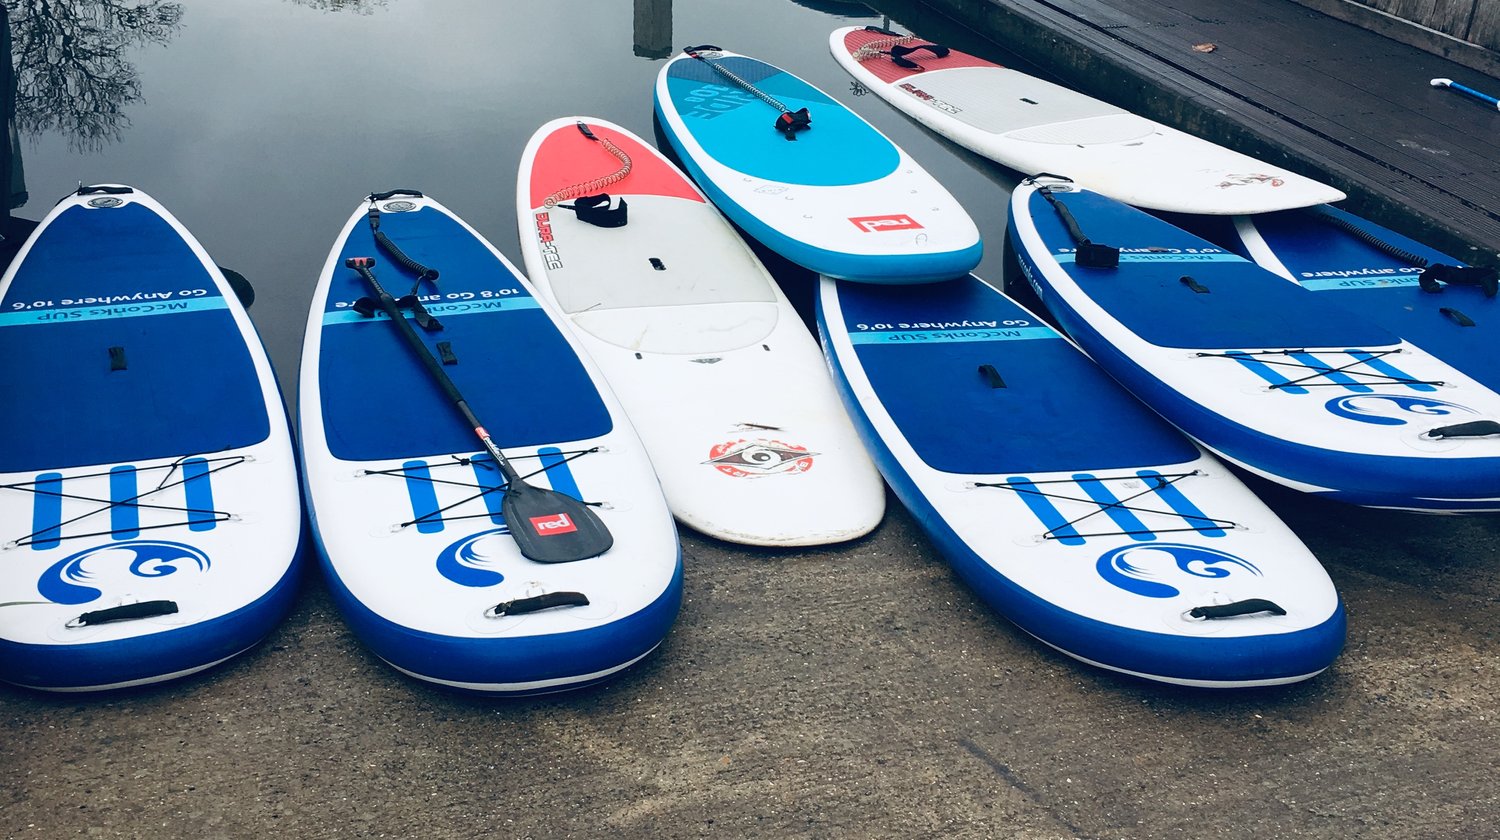 River medway canoes - Canoe Hire Kent - Kayak Hire - SUP Hire ...